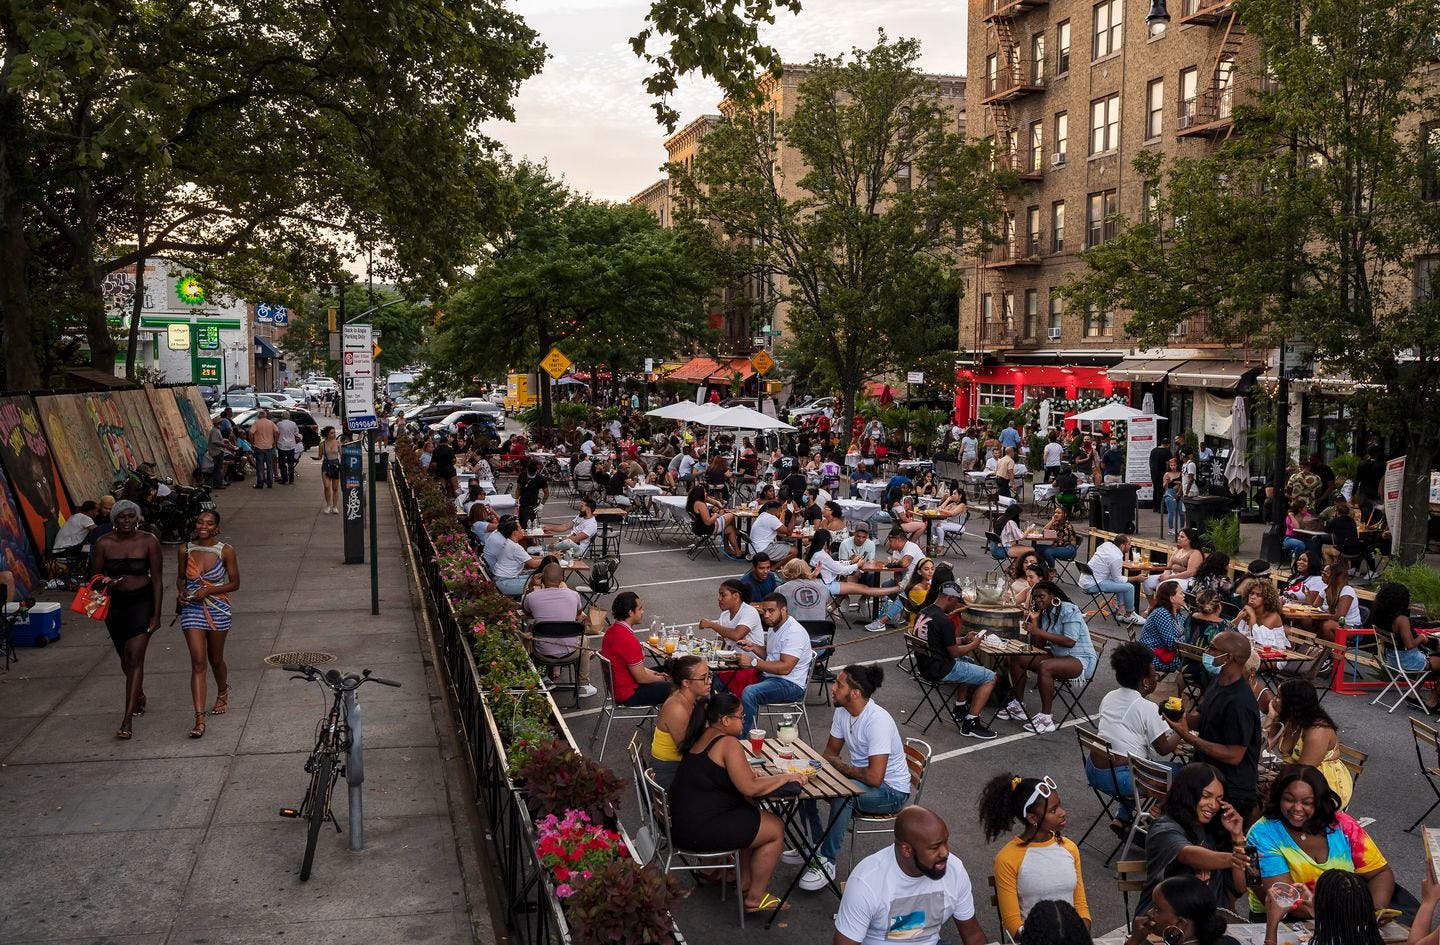 Restaurants have taken over Dyckman Street in northern Manhattan, which has been temporarily closed to cars during the coronavirus pandemic.